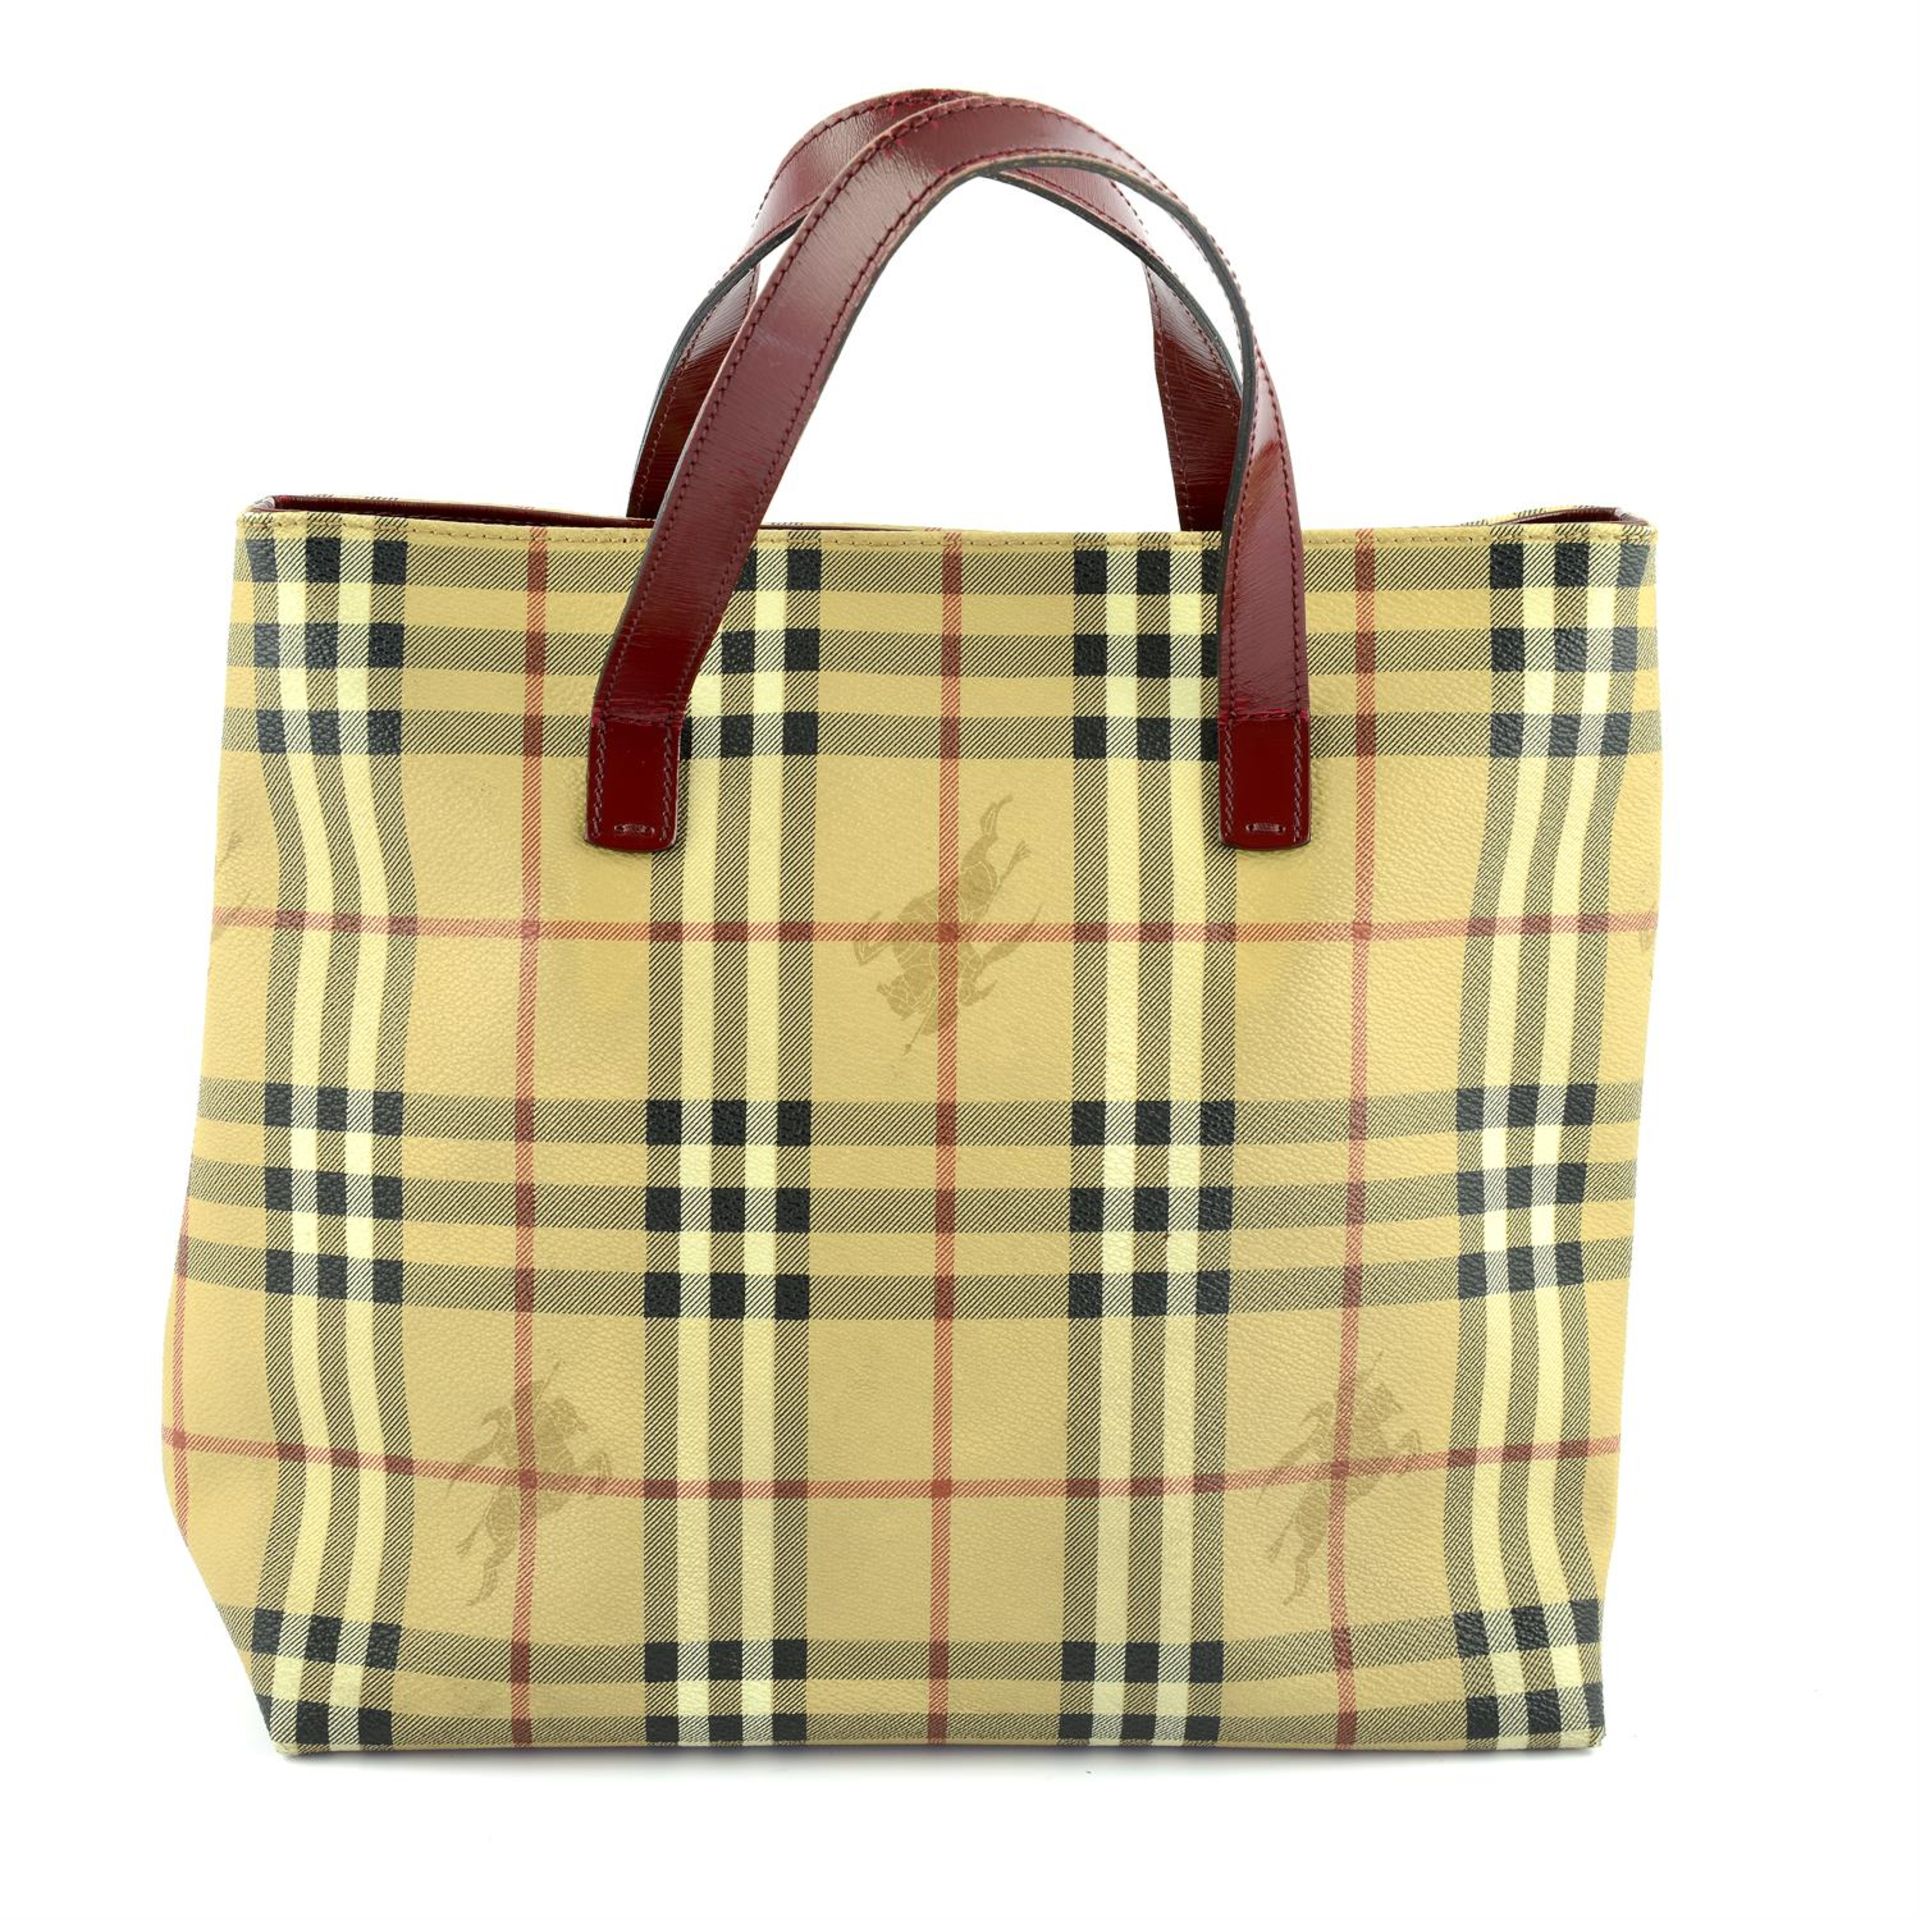 BURBERRY - a small tote bag. - Image 2 of 4